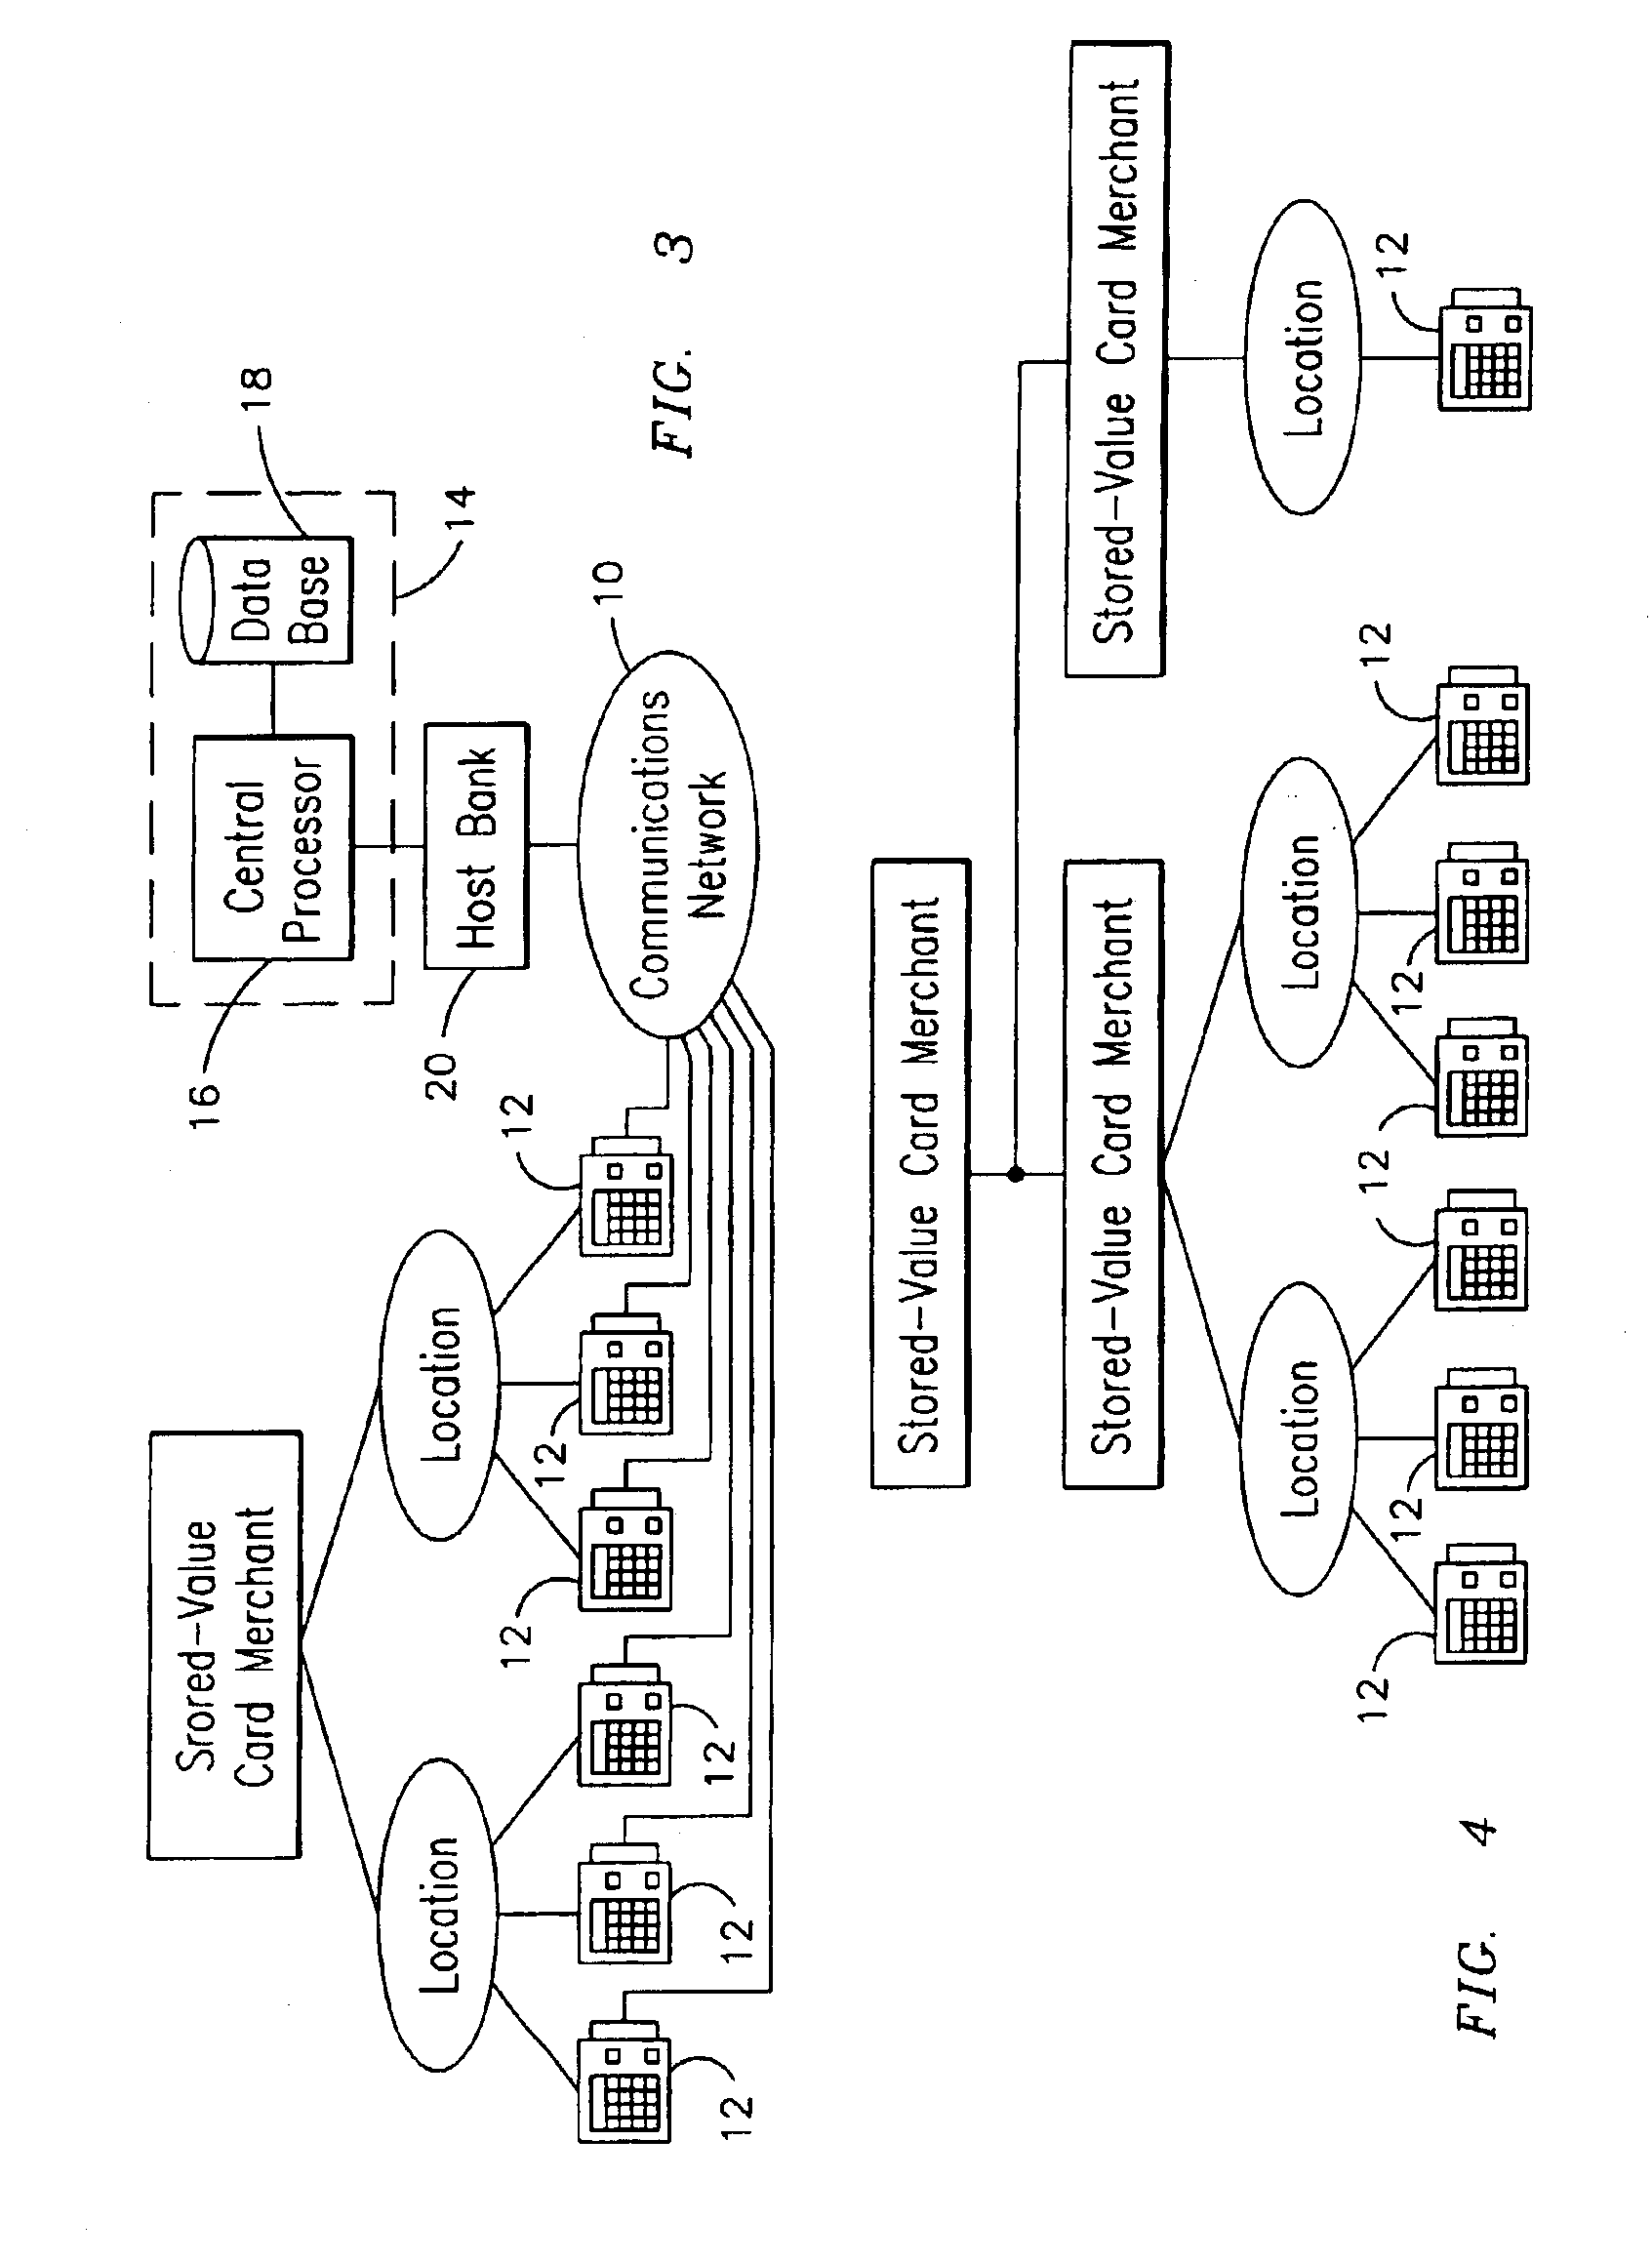 System and method for managing stored-value card data